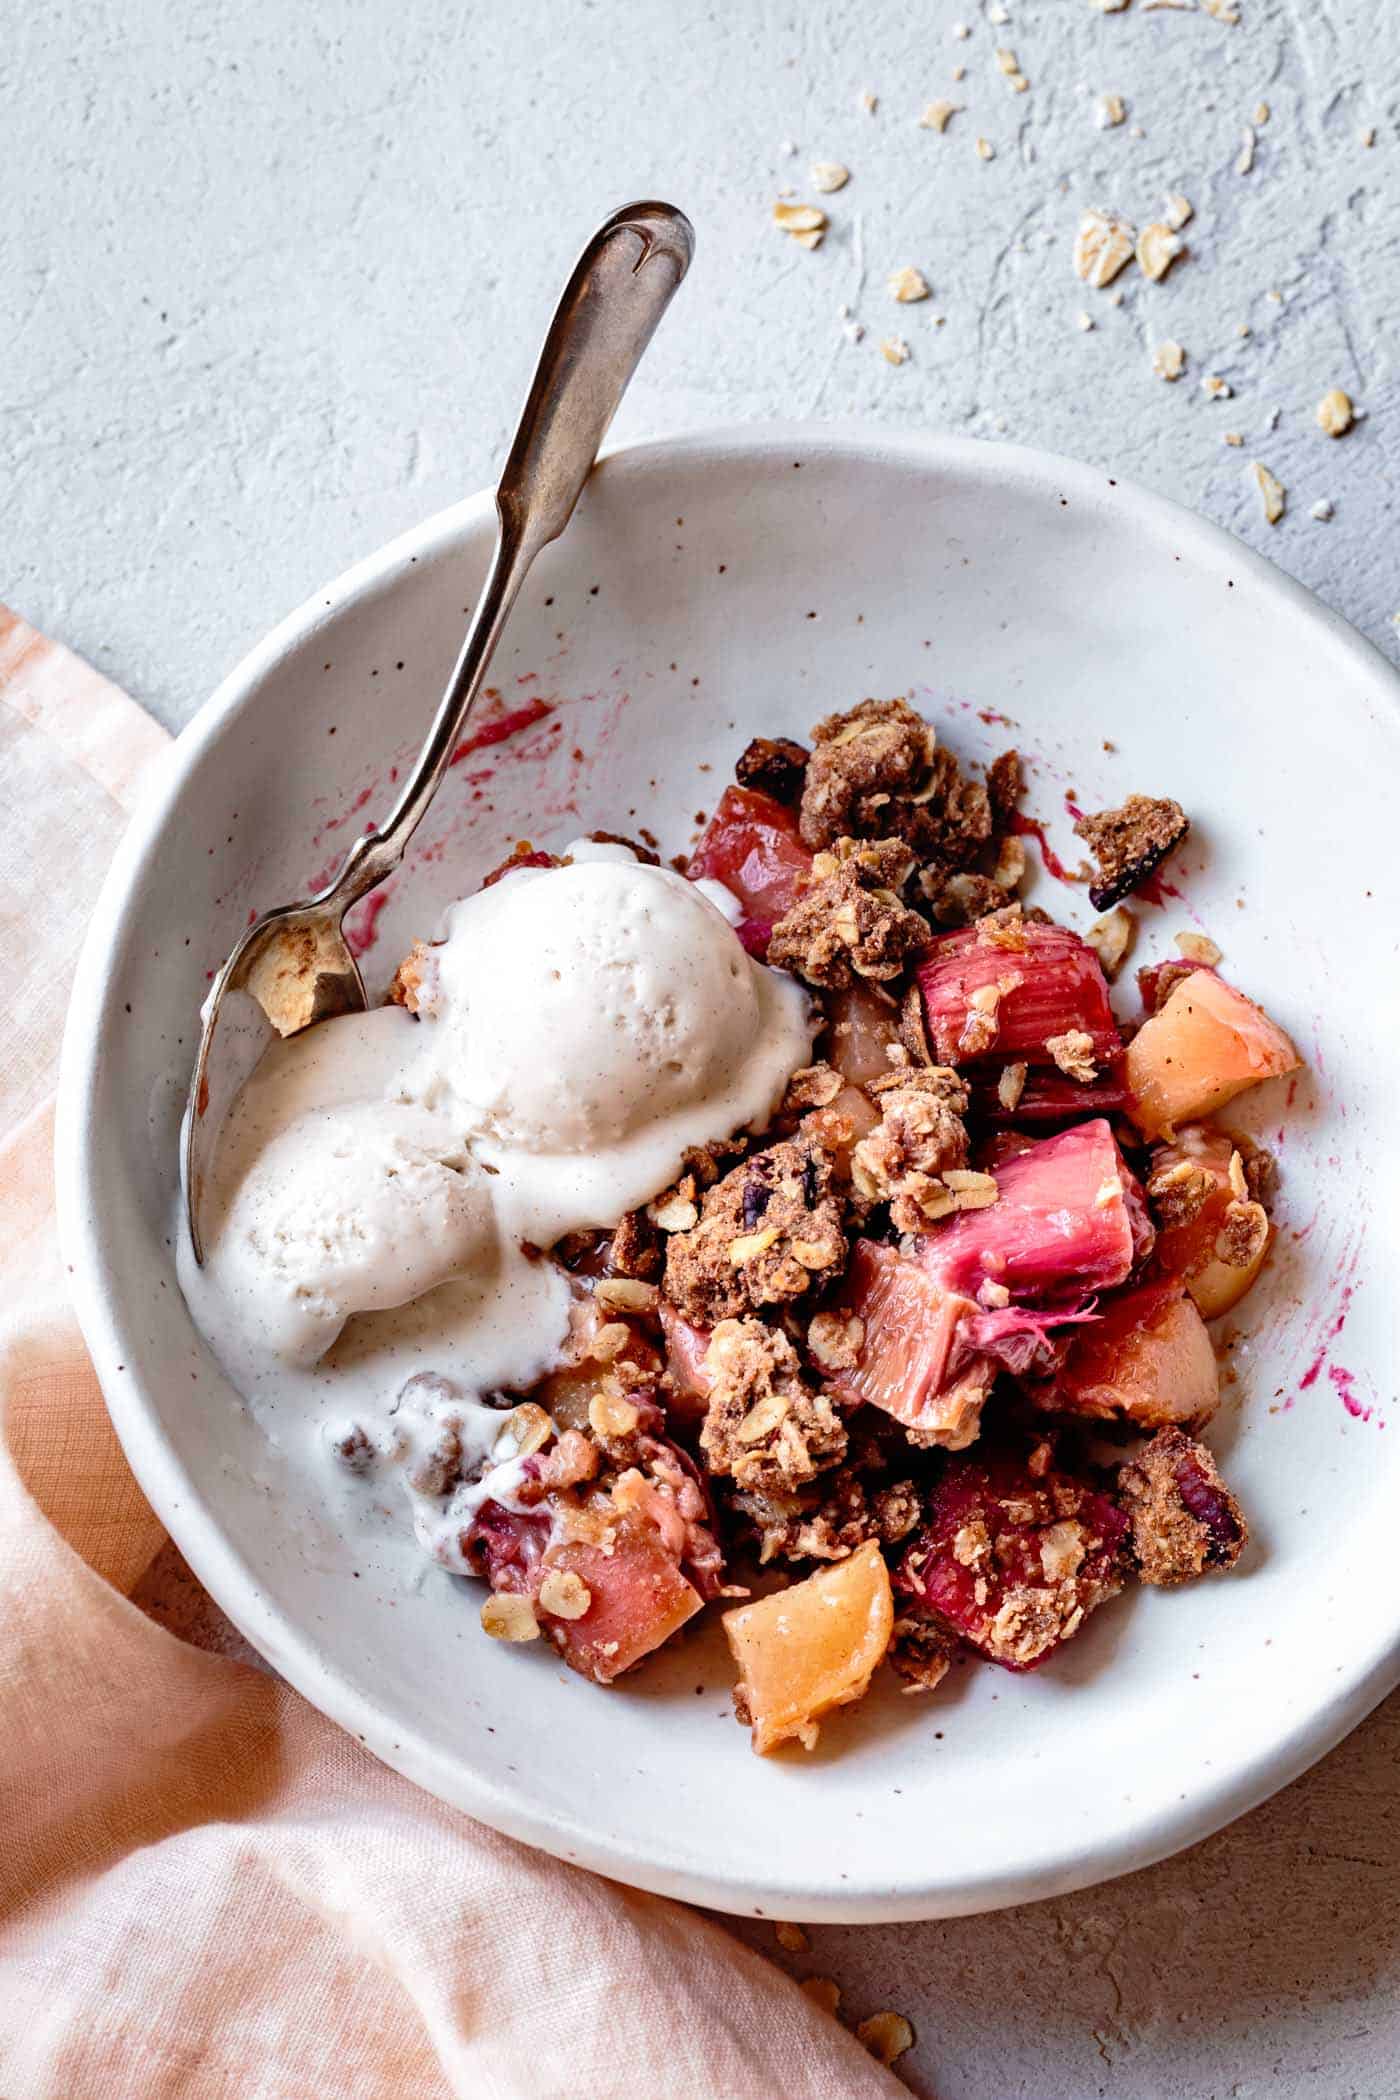 Bowl of apple and rhubarb dessert with ice cream 